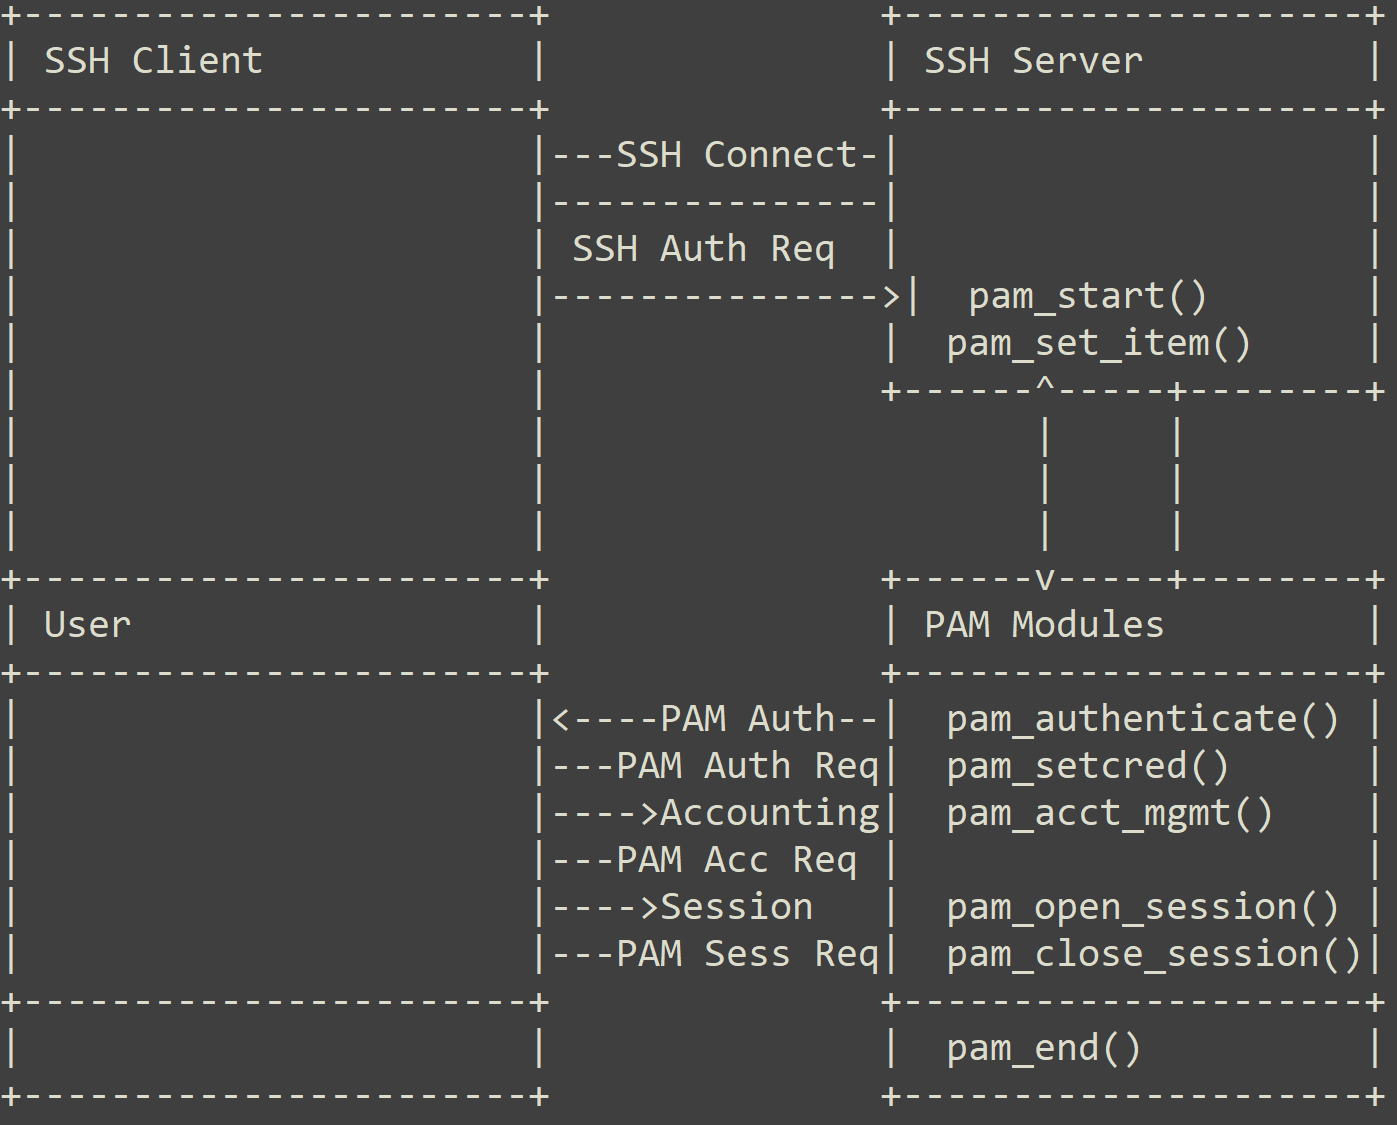 Image 1 is a framework of the SSH authentication process with PAM. The SSH client connects to the SSH server and from there flows to the PAM modules that authenticate the user. 